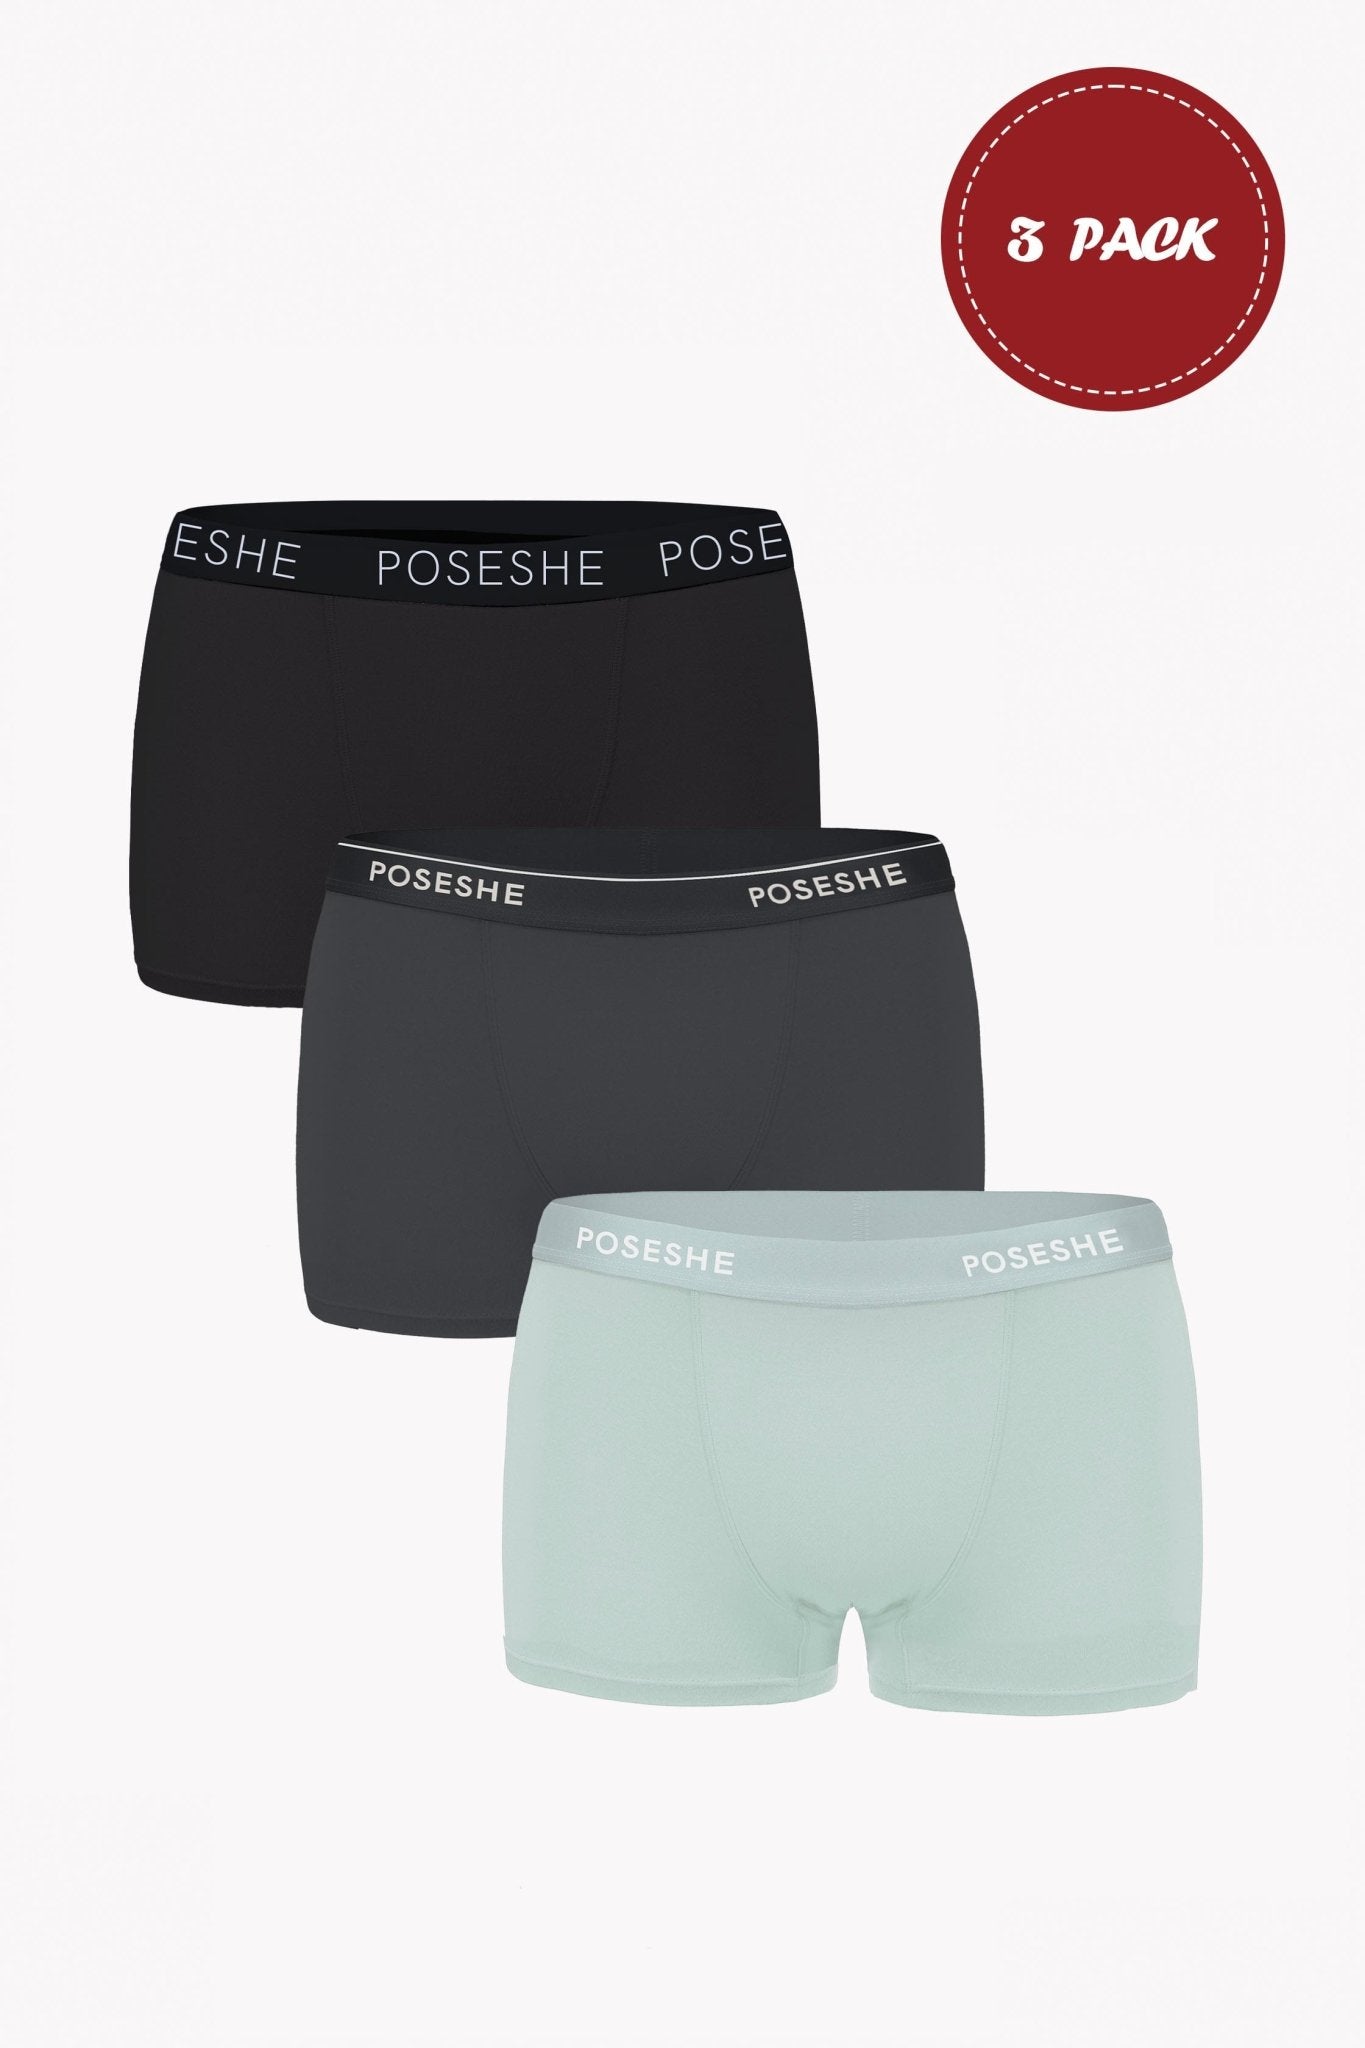 POSESHE Women's Boxer Briefs 3 Inseam, Boyshorts Panties Underwear, Light  Blue M(8) - Imported Products from USA - iBhejo